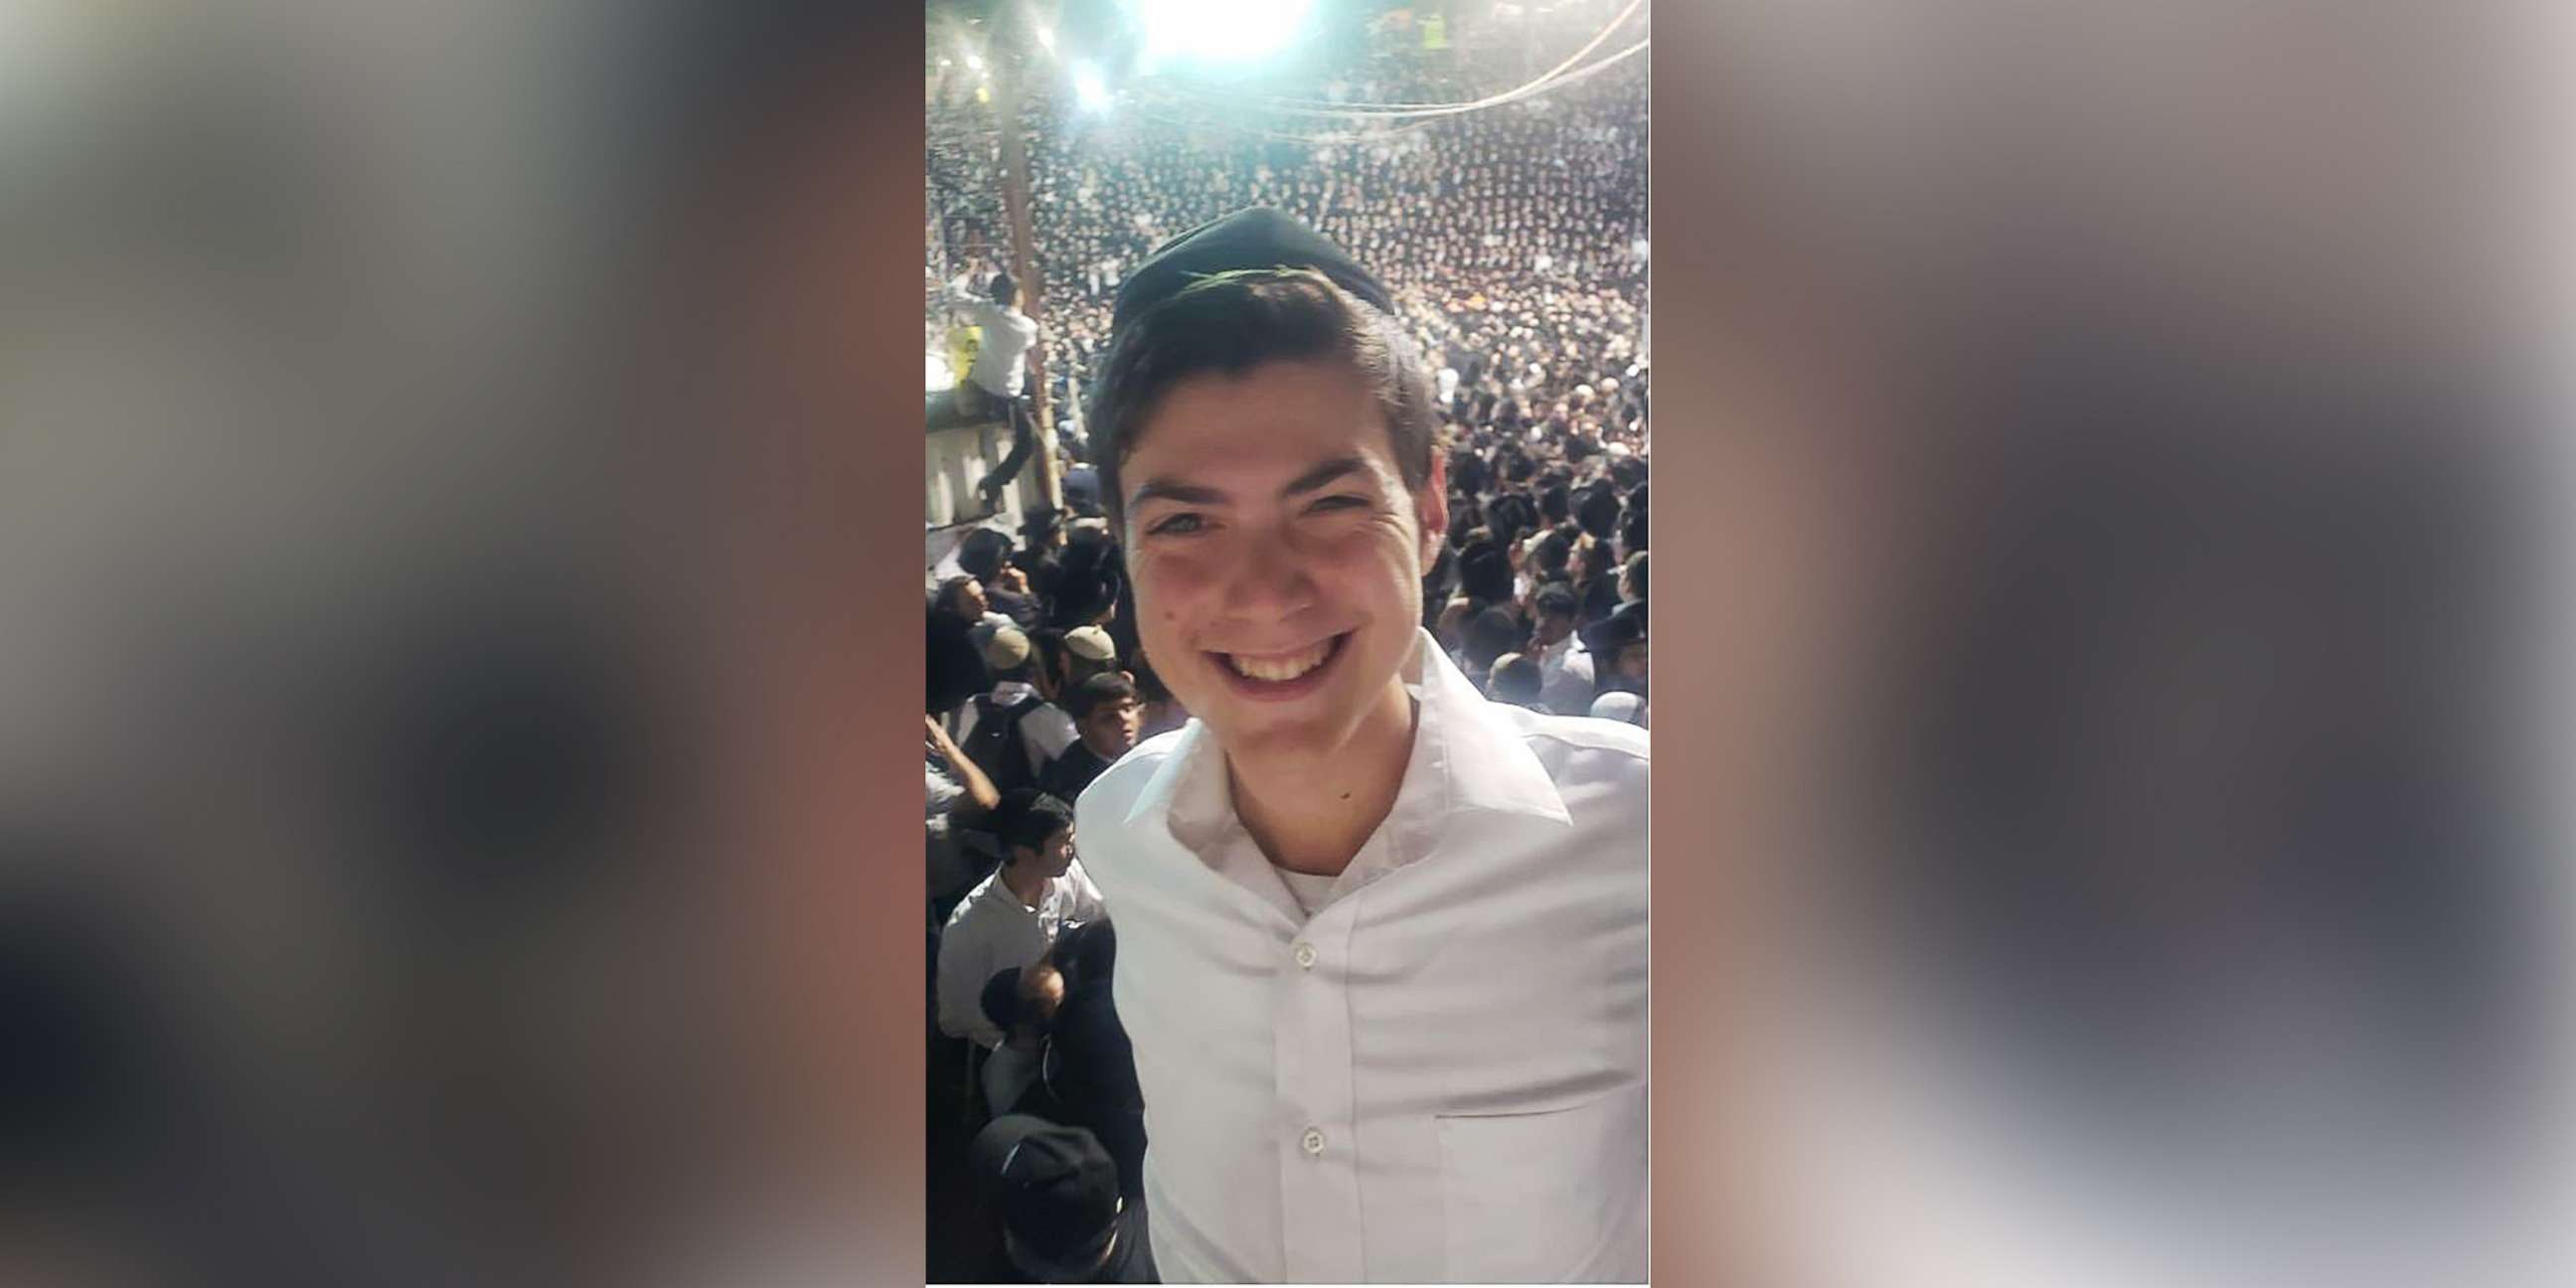 PHOTO: Daniel "Donny" Morris from Bergenfield, N.J. is one of the Americans who died in the stampede in Israel, April 29, 2021. The 19-year-old was studying in Israel for the year on a gap program.